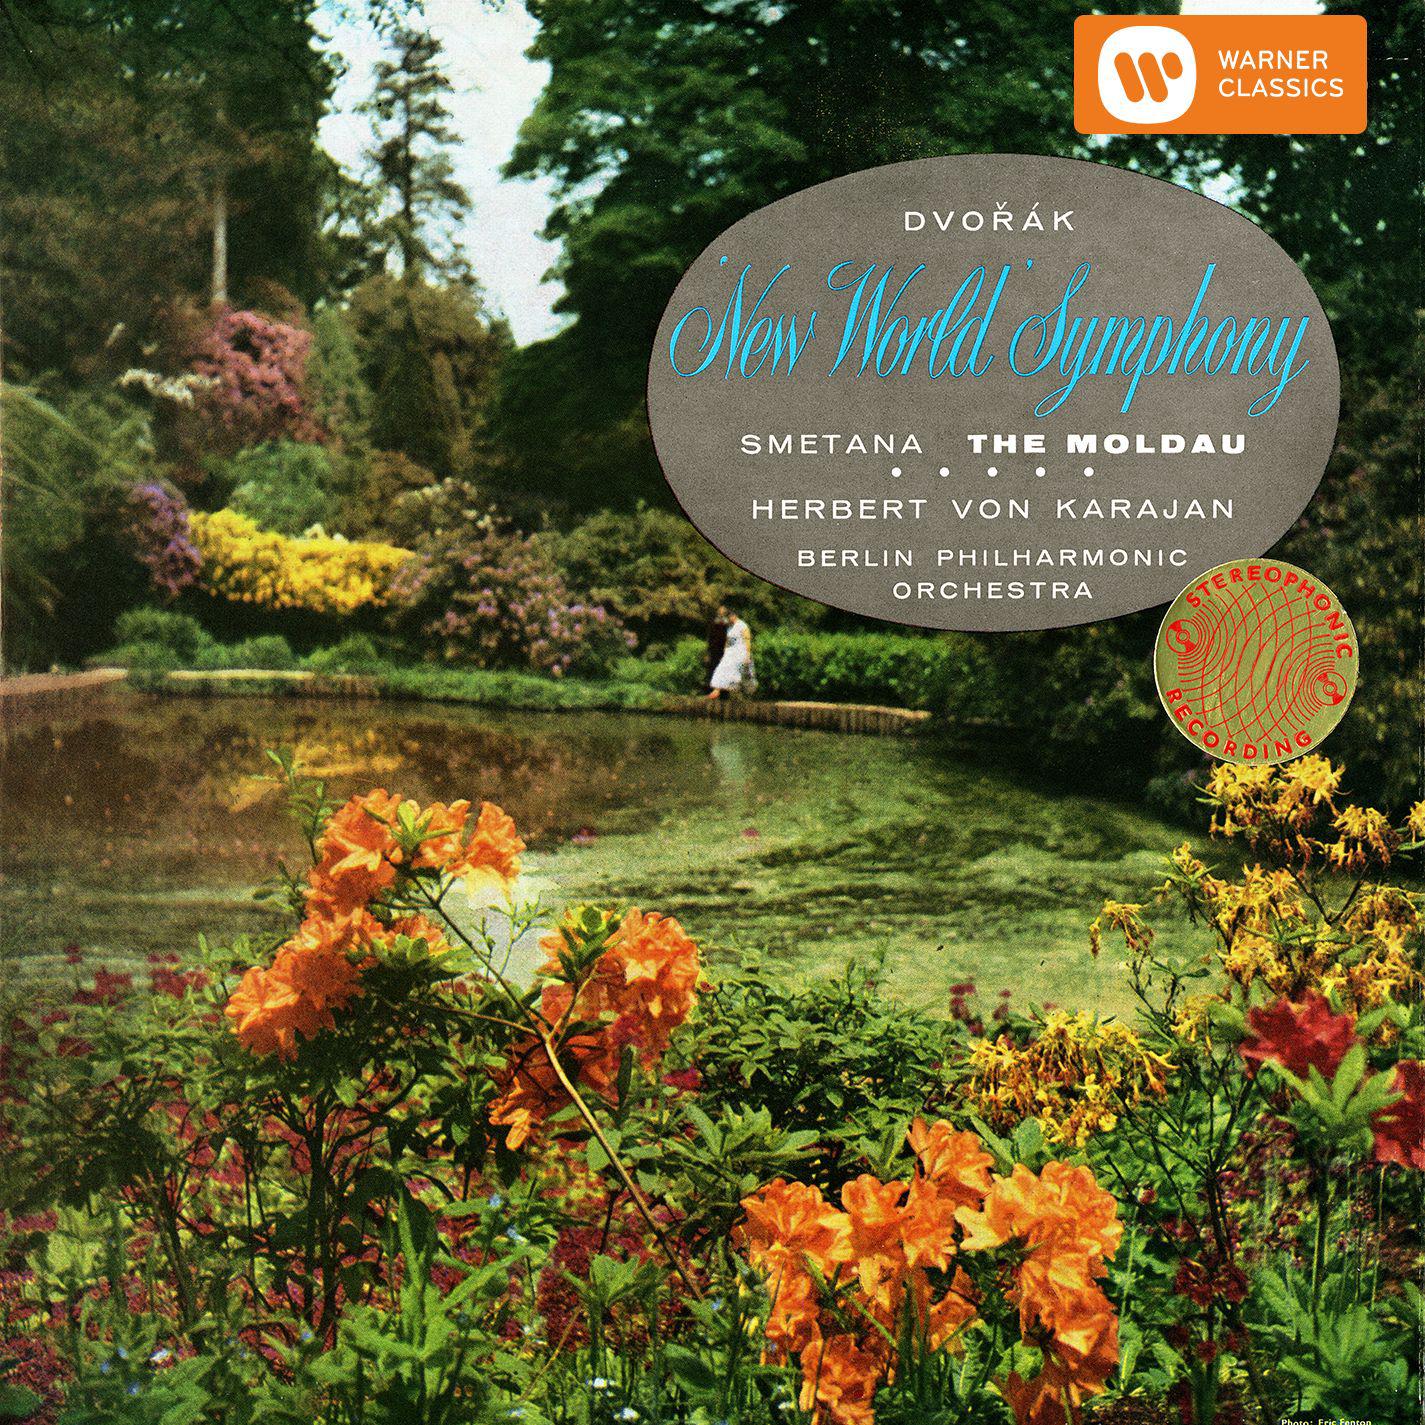 Symphony No. 9 in E Minor, Op. 95, 'From the New World': III. Scherzo - Molto vivace